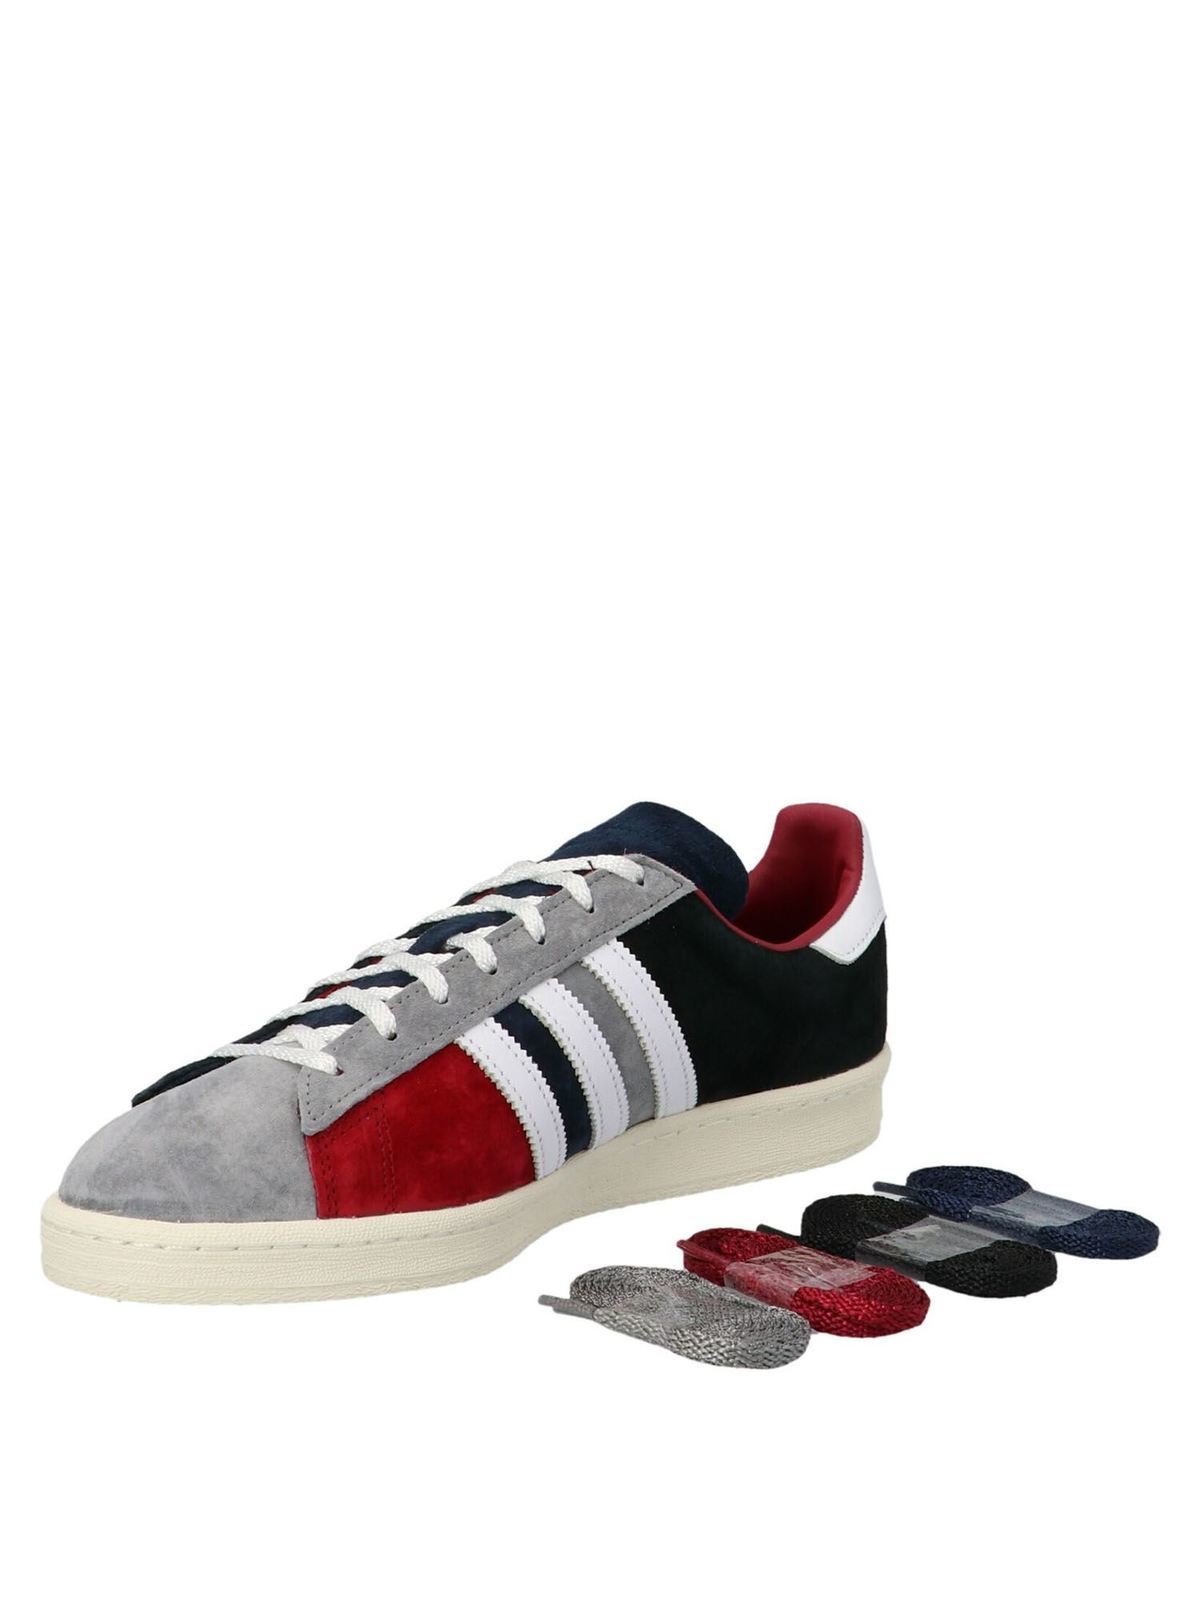 junk Gymnastik Horn Trainers Adidas Originals - Campus 80 sneakers in blue and gray - FY7152